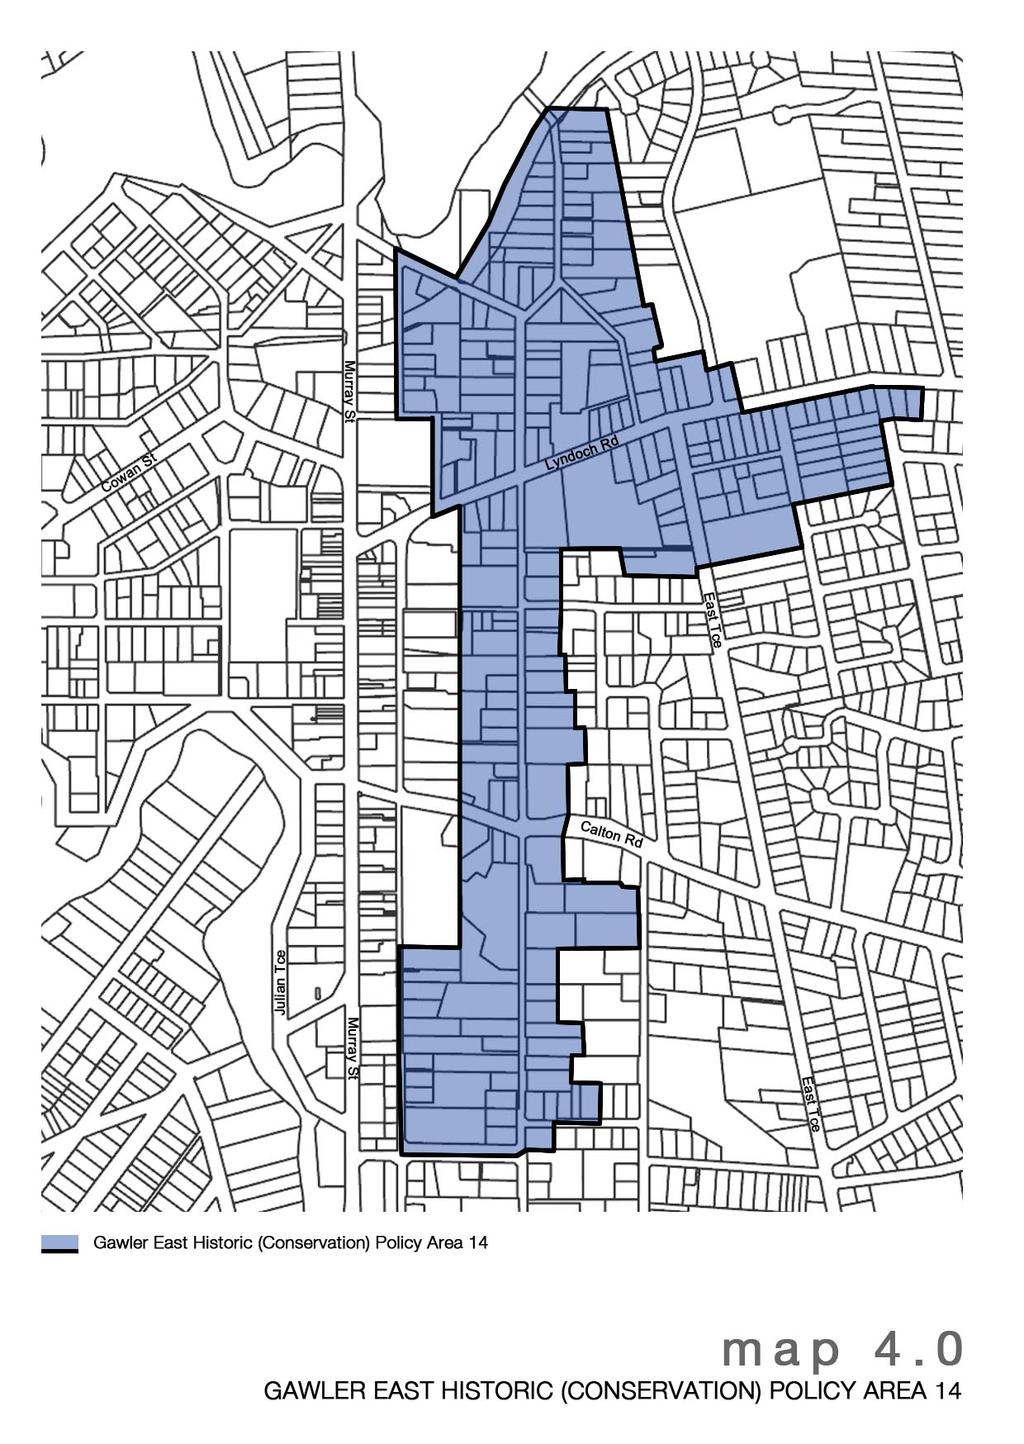 1.5.3 Gawler East Residential Historic (Conservation) Policy Area 14 Significance The first settlement to extend beyond the boundary of the original Gawler Plan, the Gawler East Policy Area